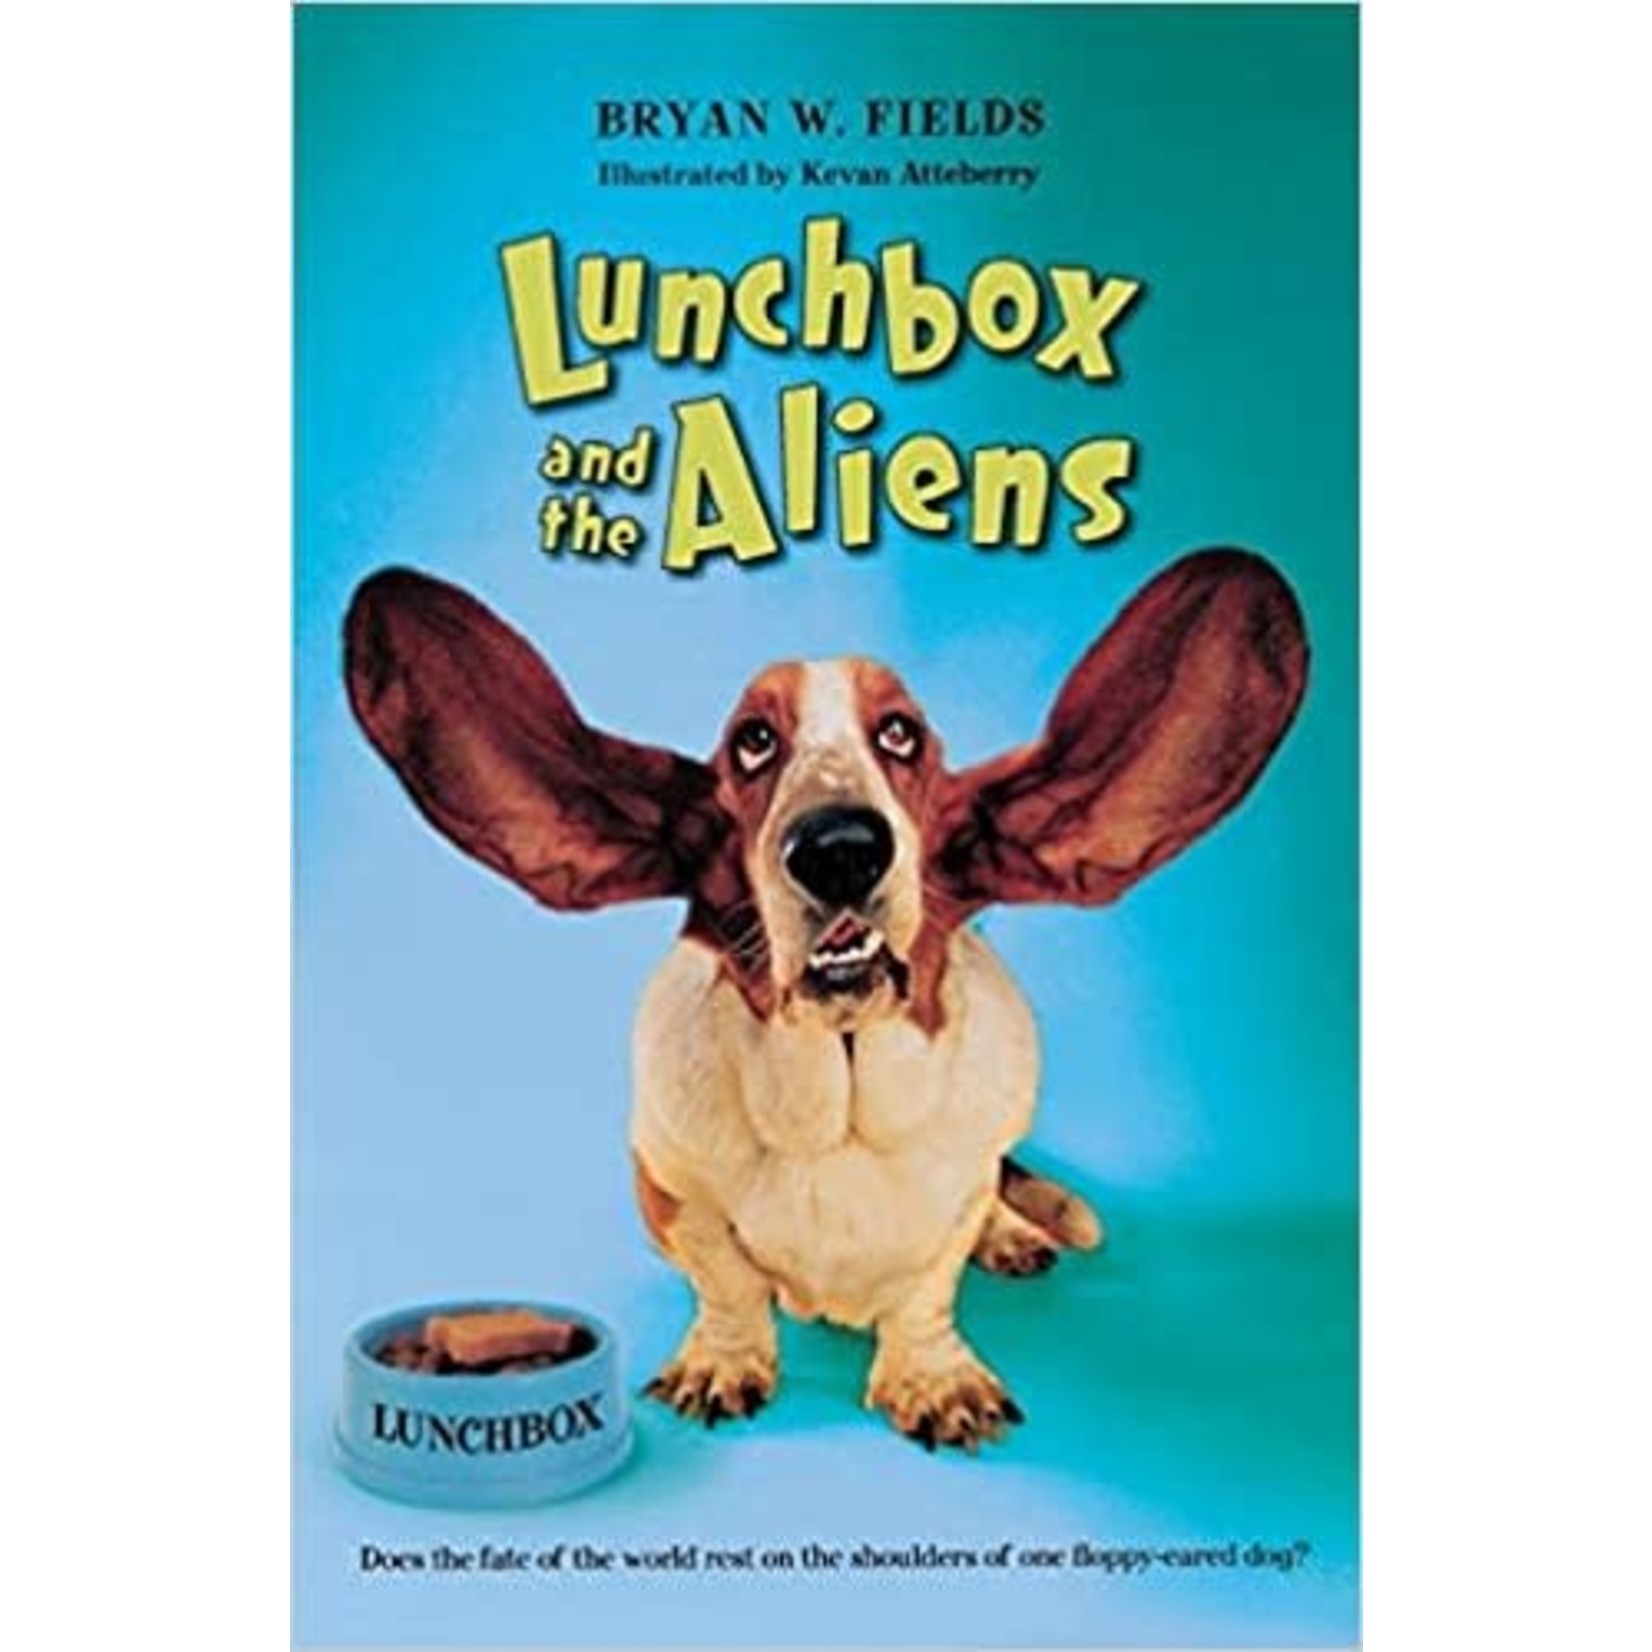 Bryan W Fields Lunchbox and the Aliens